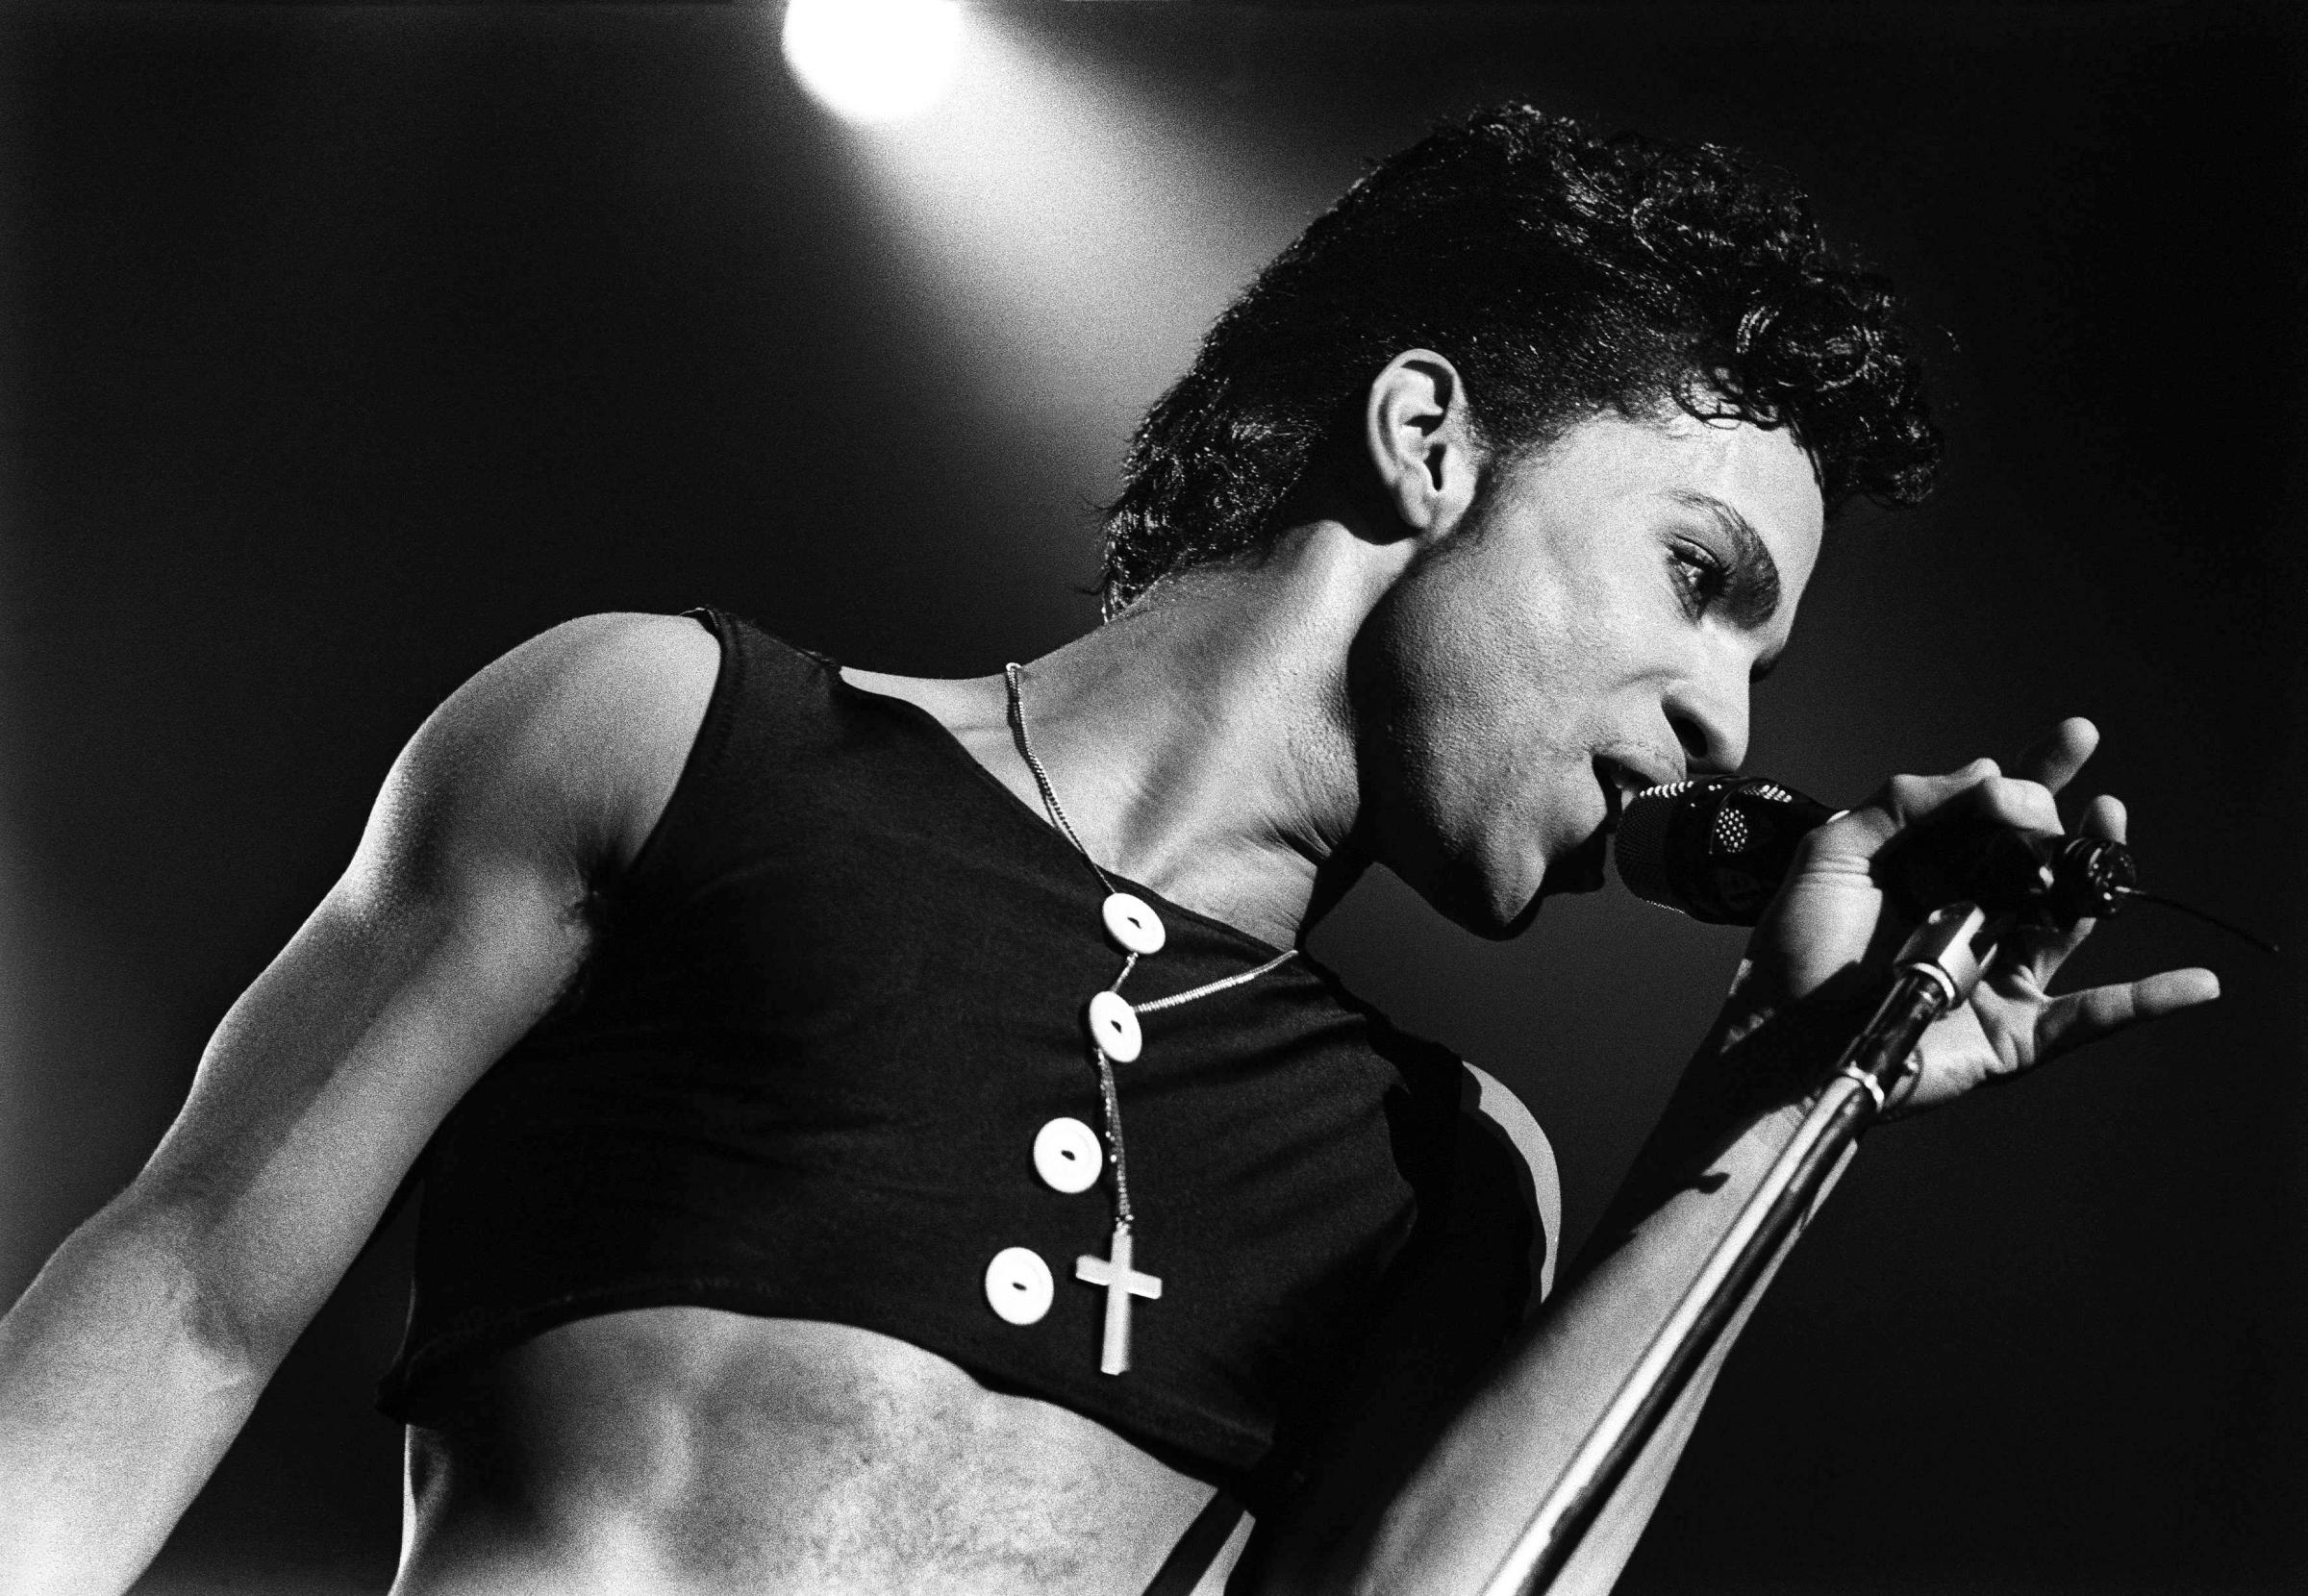 Prince and the Revolution perform on Aug. 17, 1986 in Rotterdam, Netherlands.